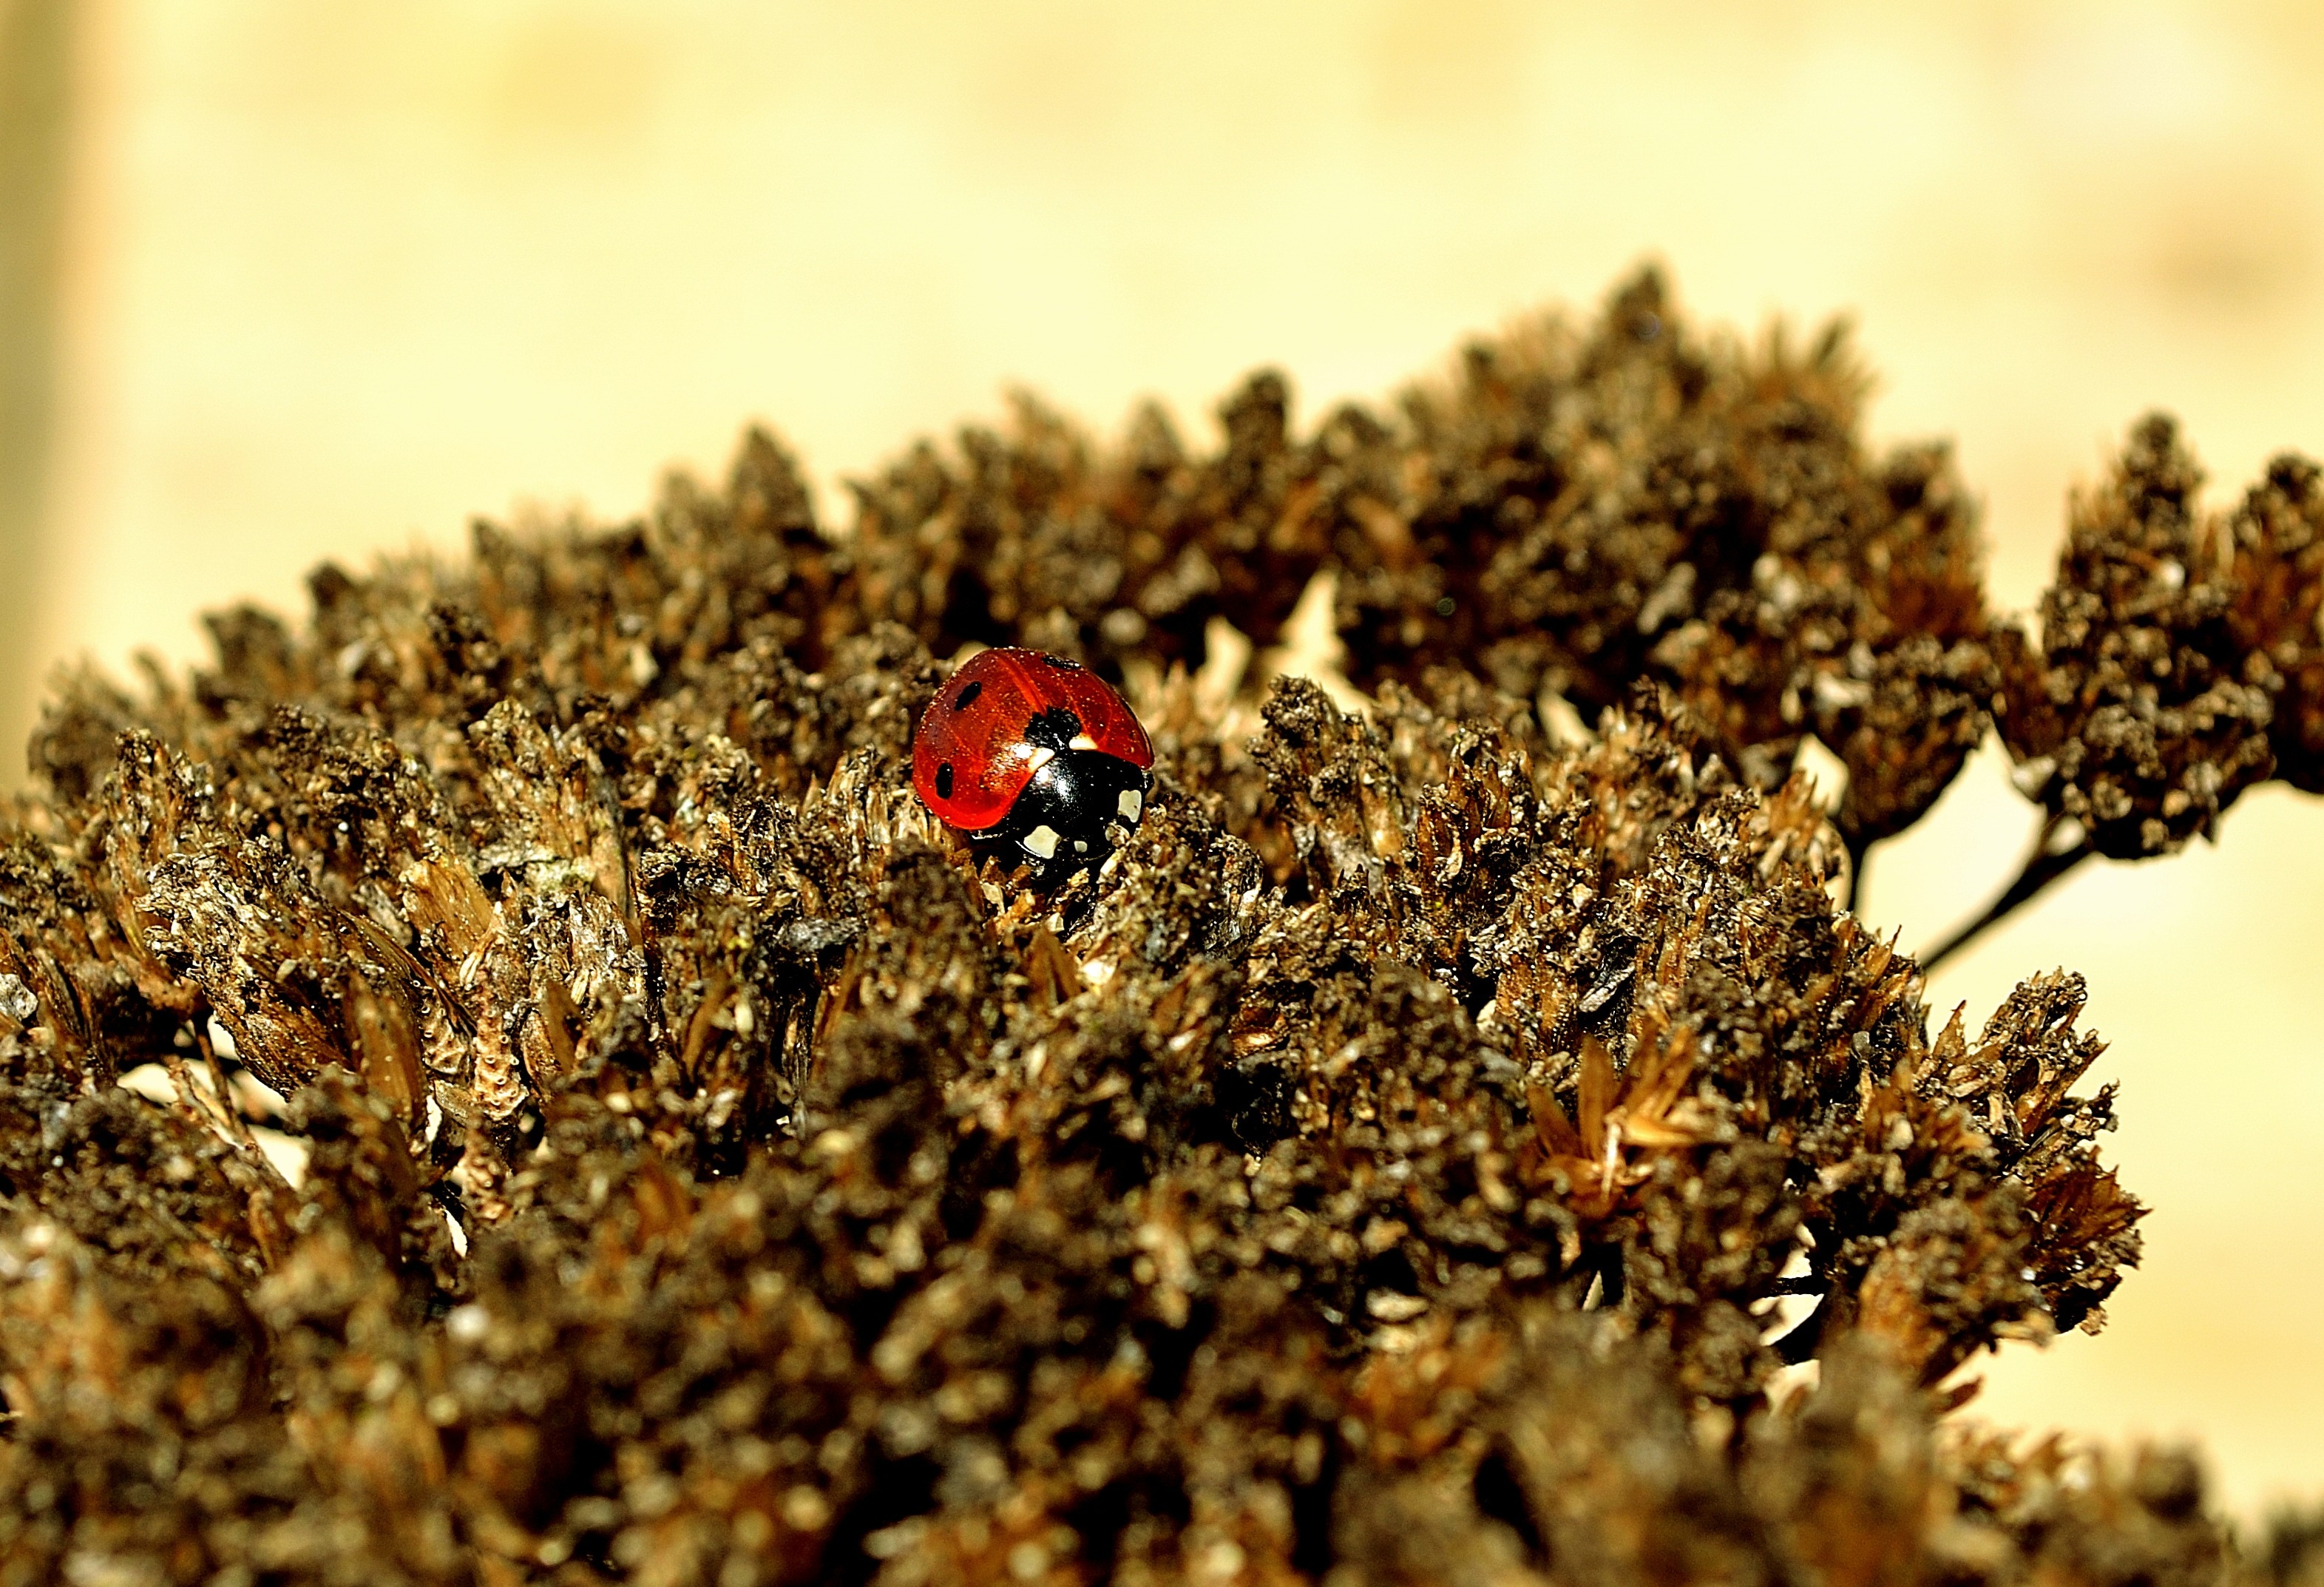 red and black ladybird beetle